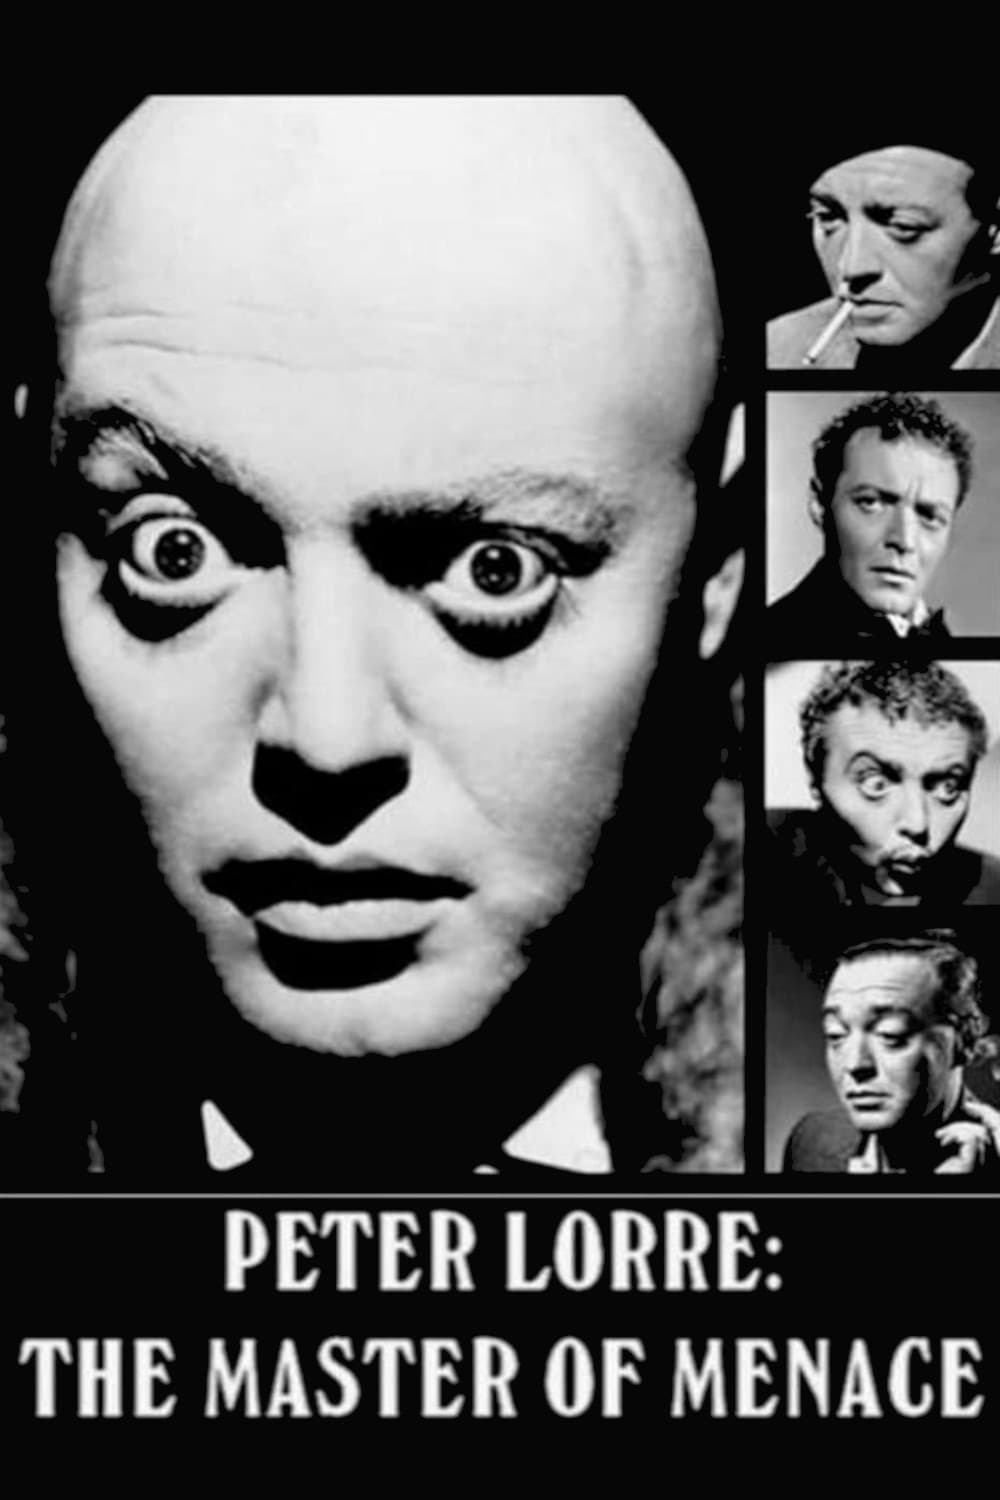 Peter Lorre: The Master of Menace (1996)